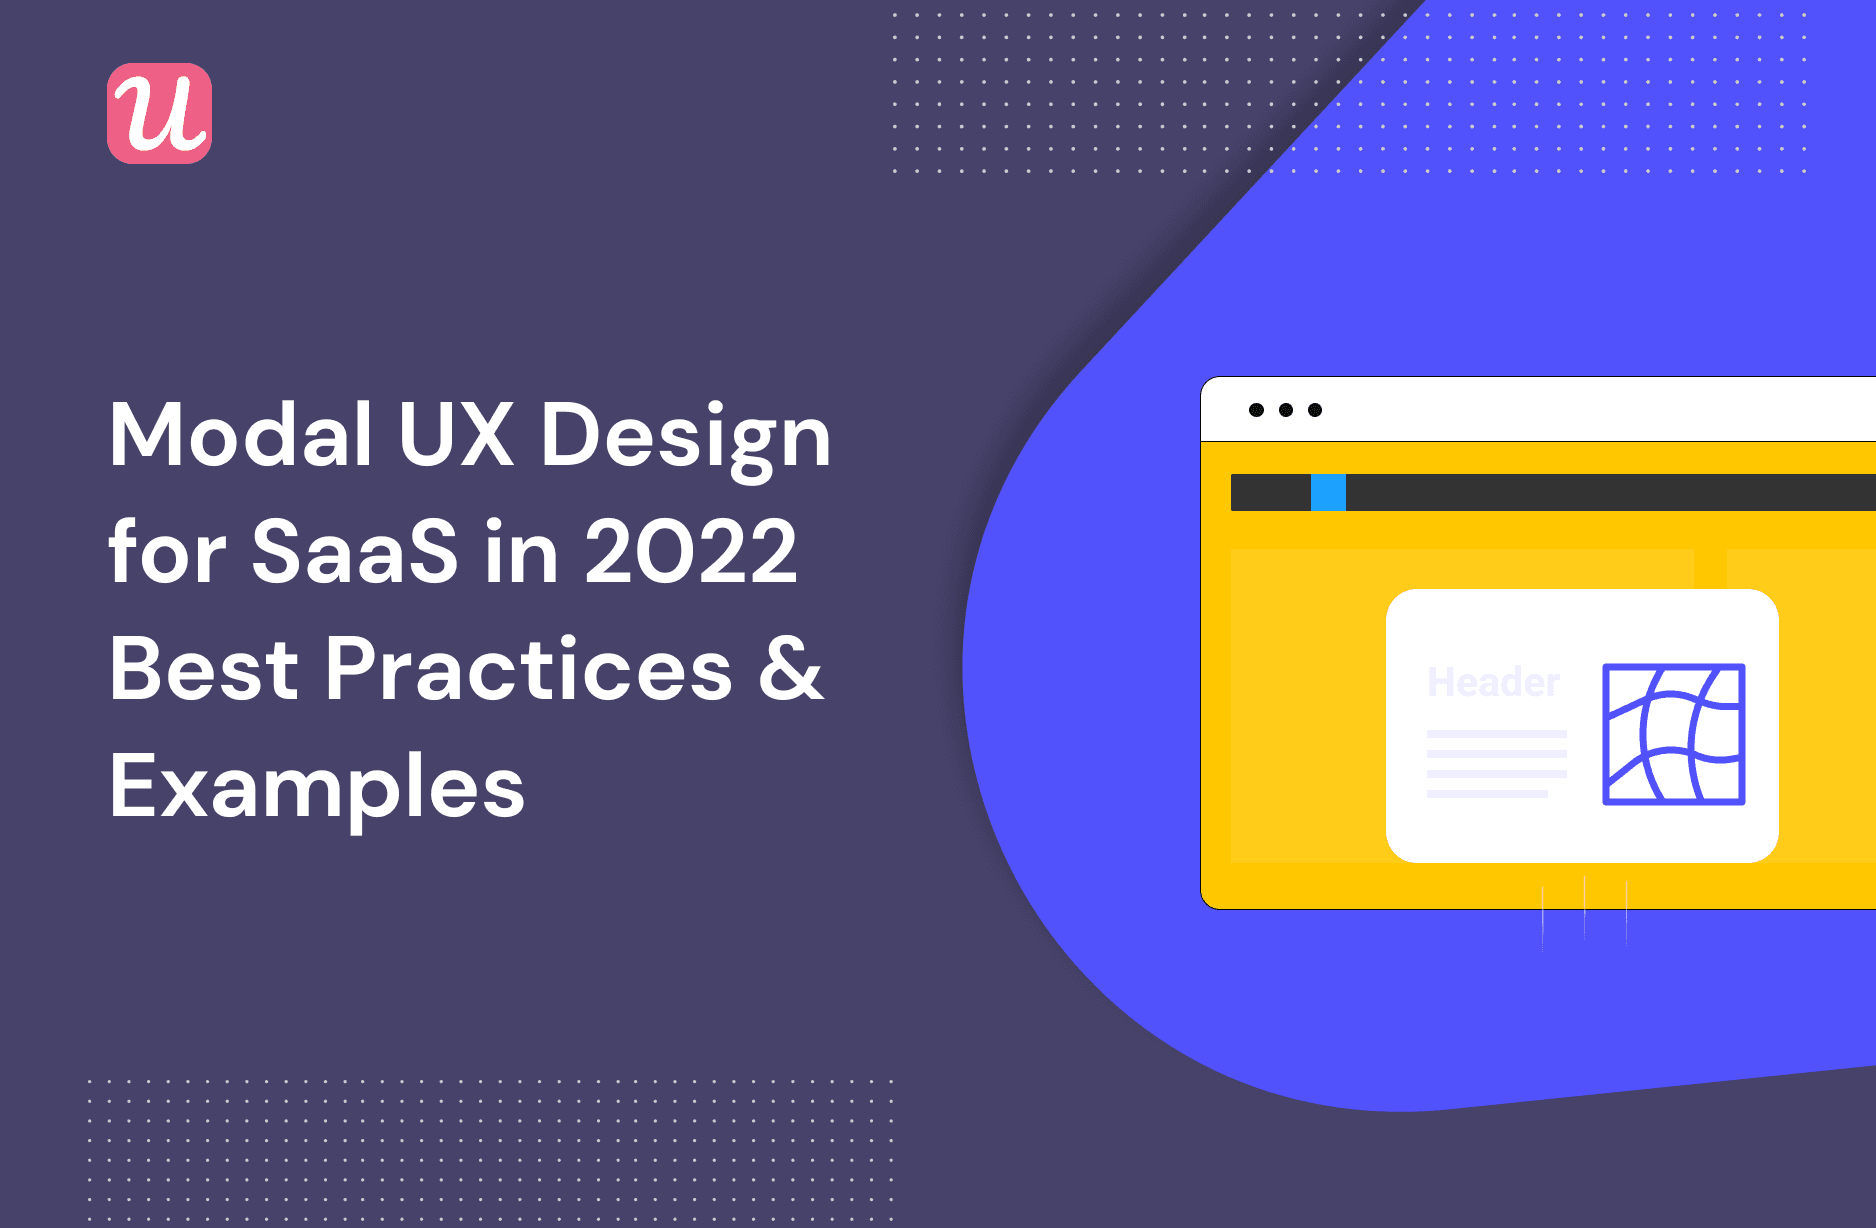 Modal UX Design for SaaS in 2022 - Best Practices & Examples